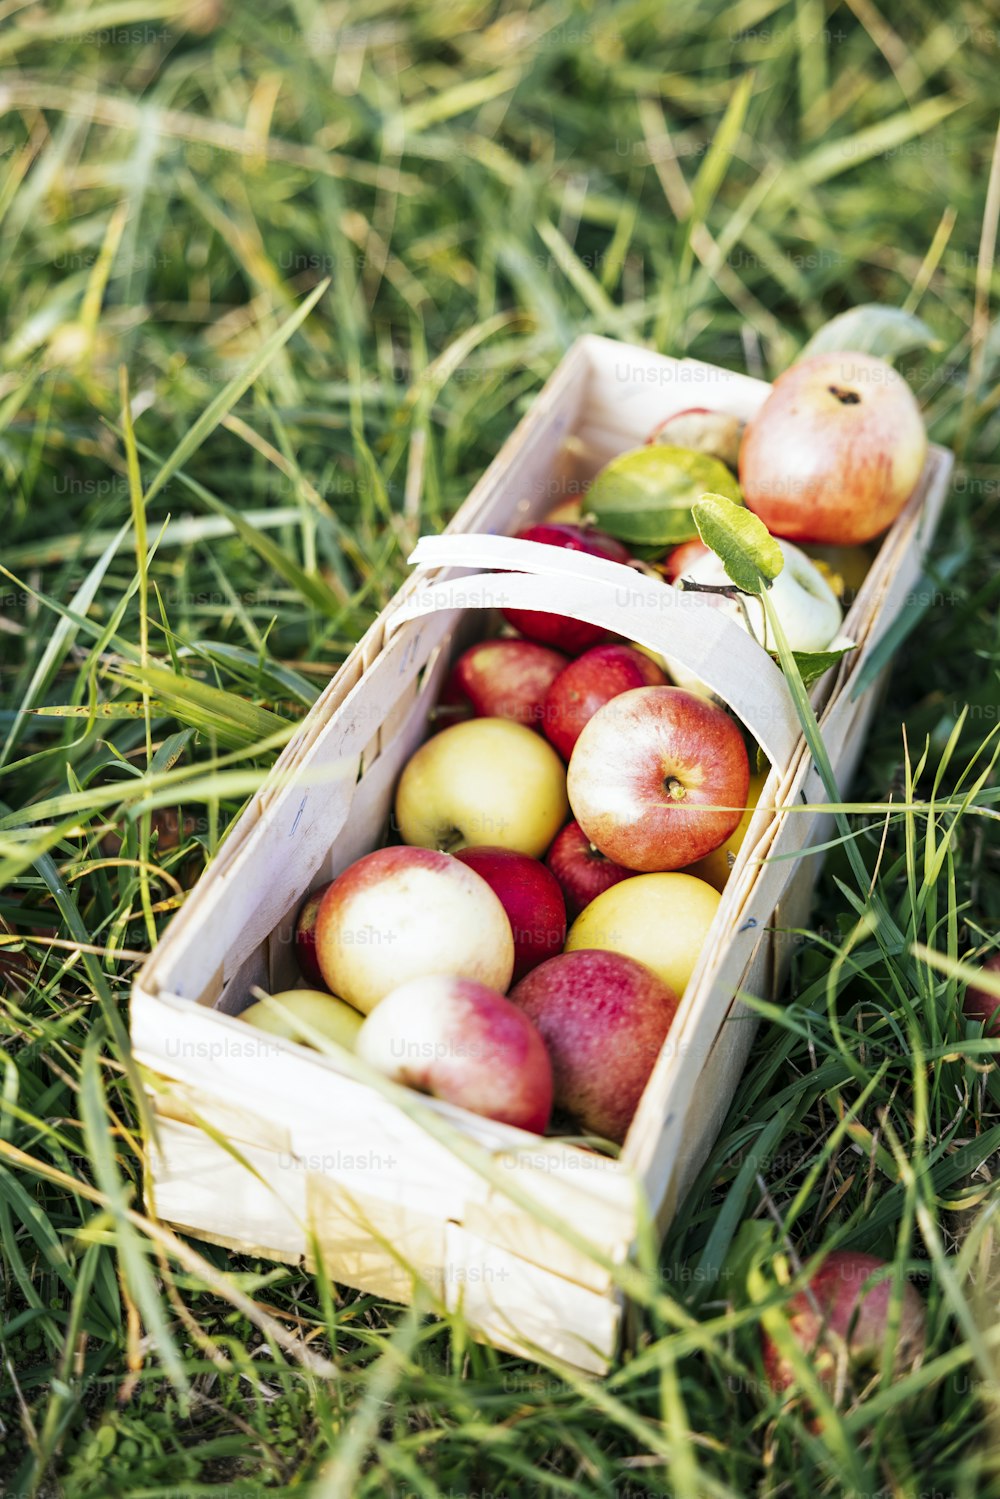 a basket of apples sitting in the grass